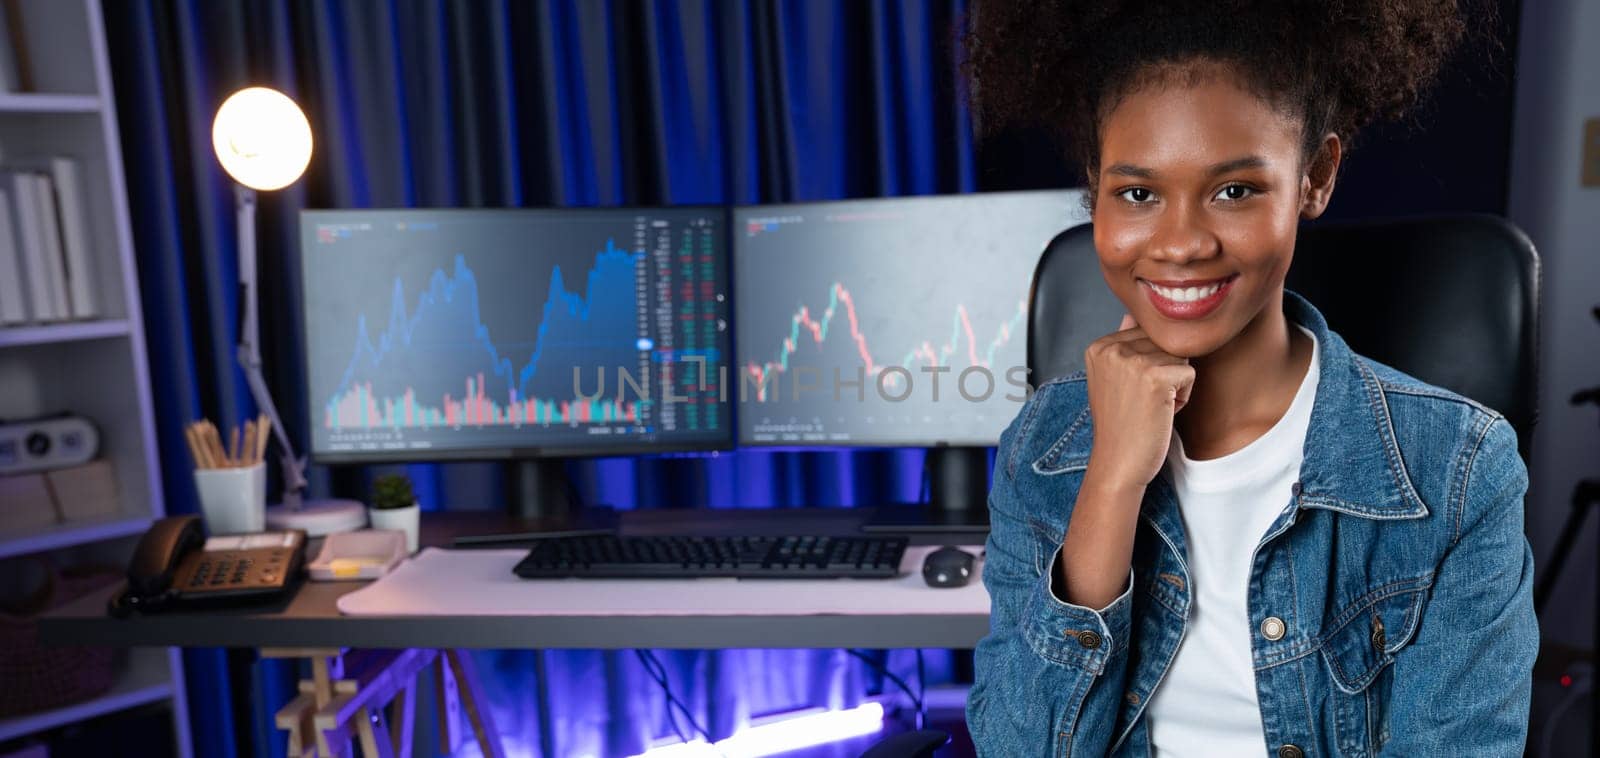 Profile of young African American businesswoman smiling on happy face wearing jeans shirt, sitting on chair against stock exchange market screen background. Concept of investment blogger. Tastemaker.